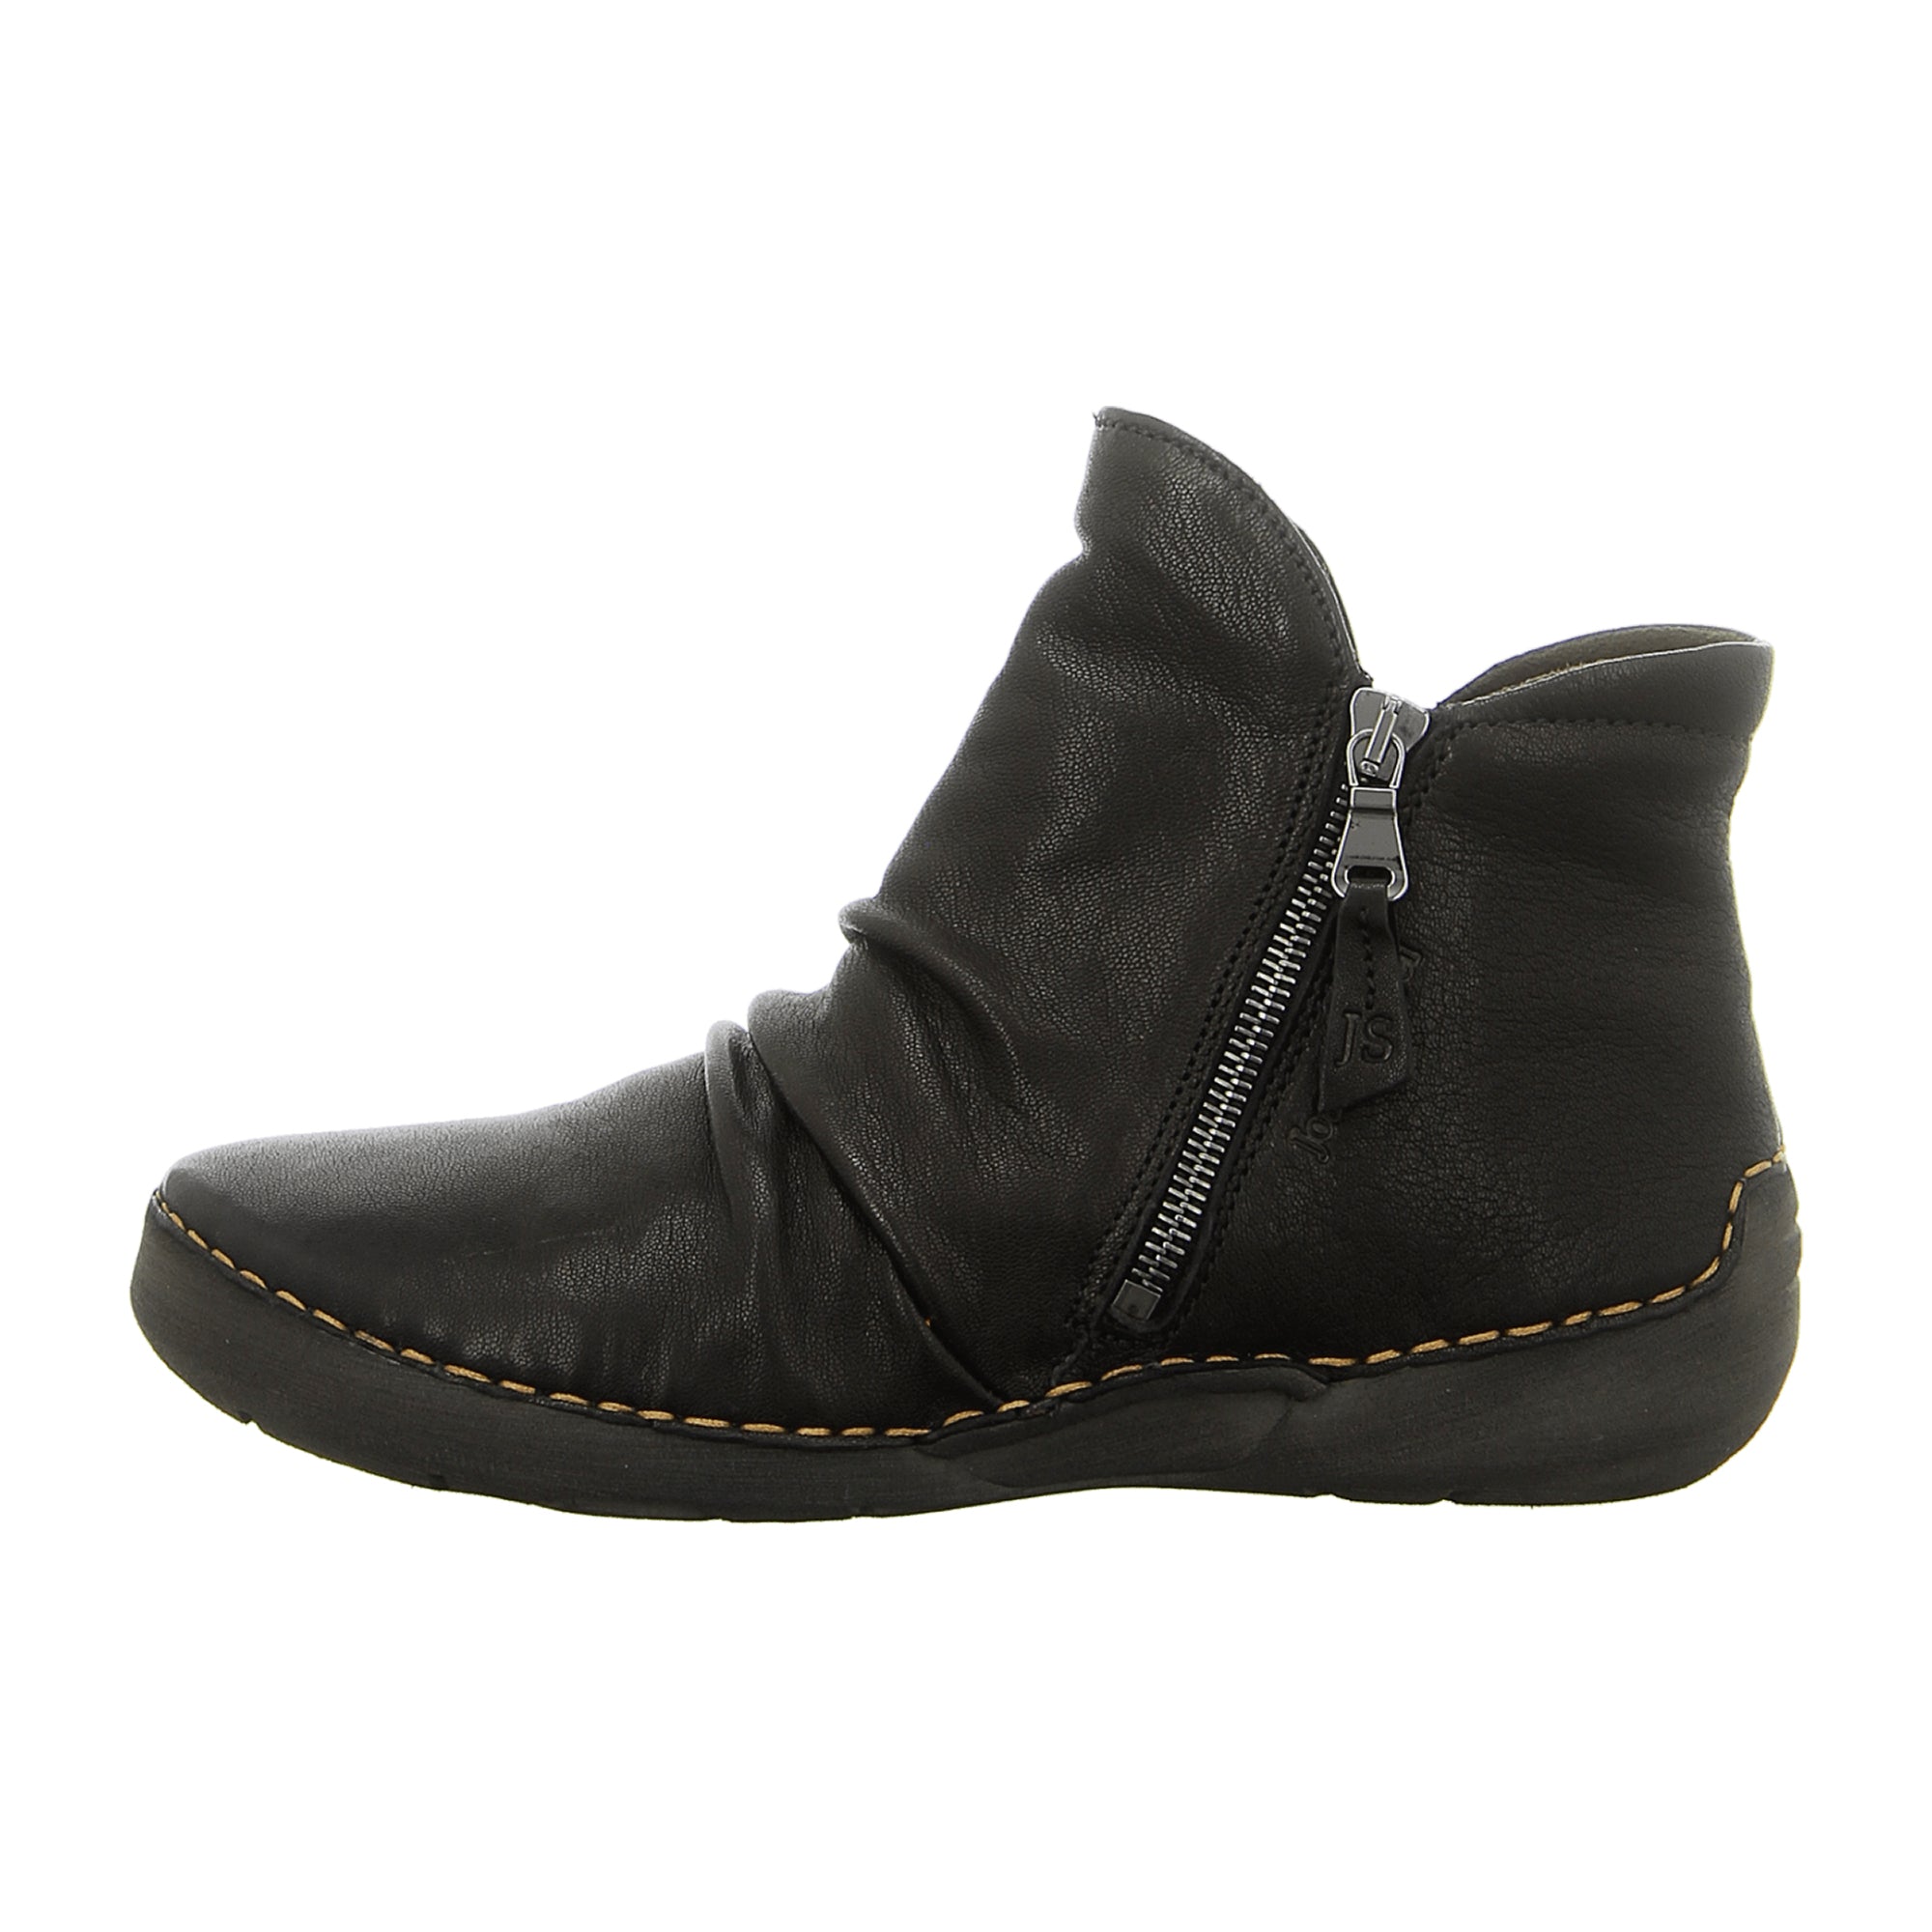 Josef Seibel Slip-On/Zipper Ankle Boot with Cold Lining Fergey 24 for Women in Black